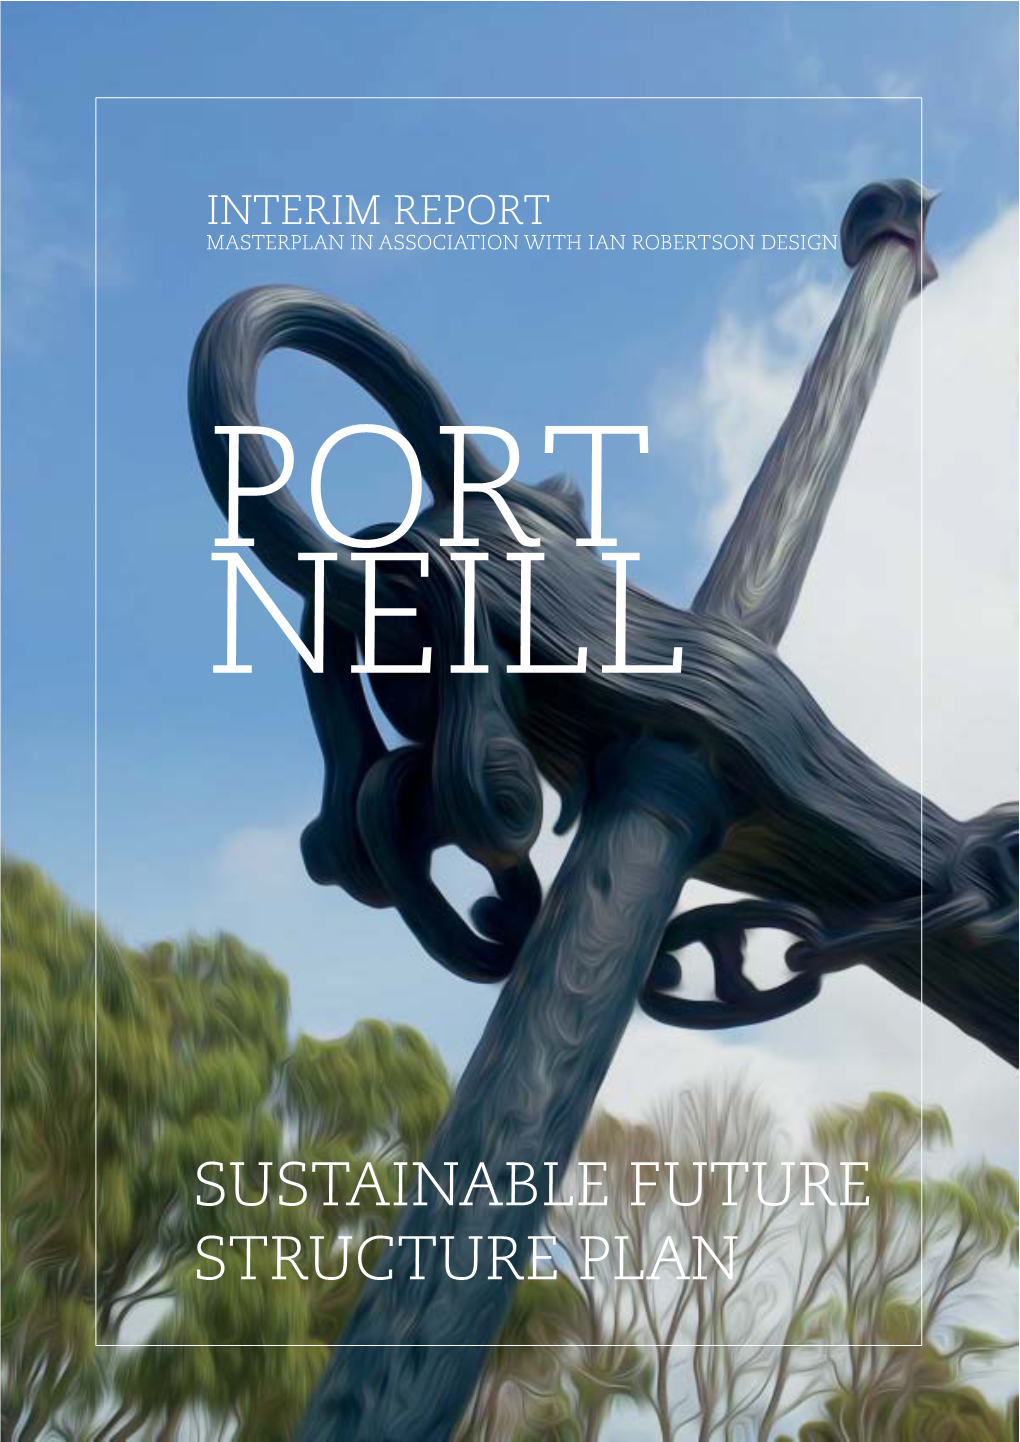 Port Neill Structure Plan from July 2013 to August 2013